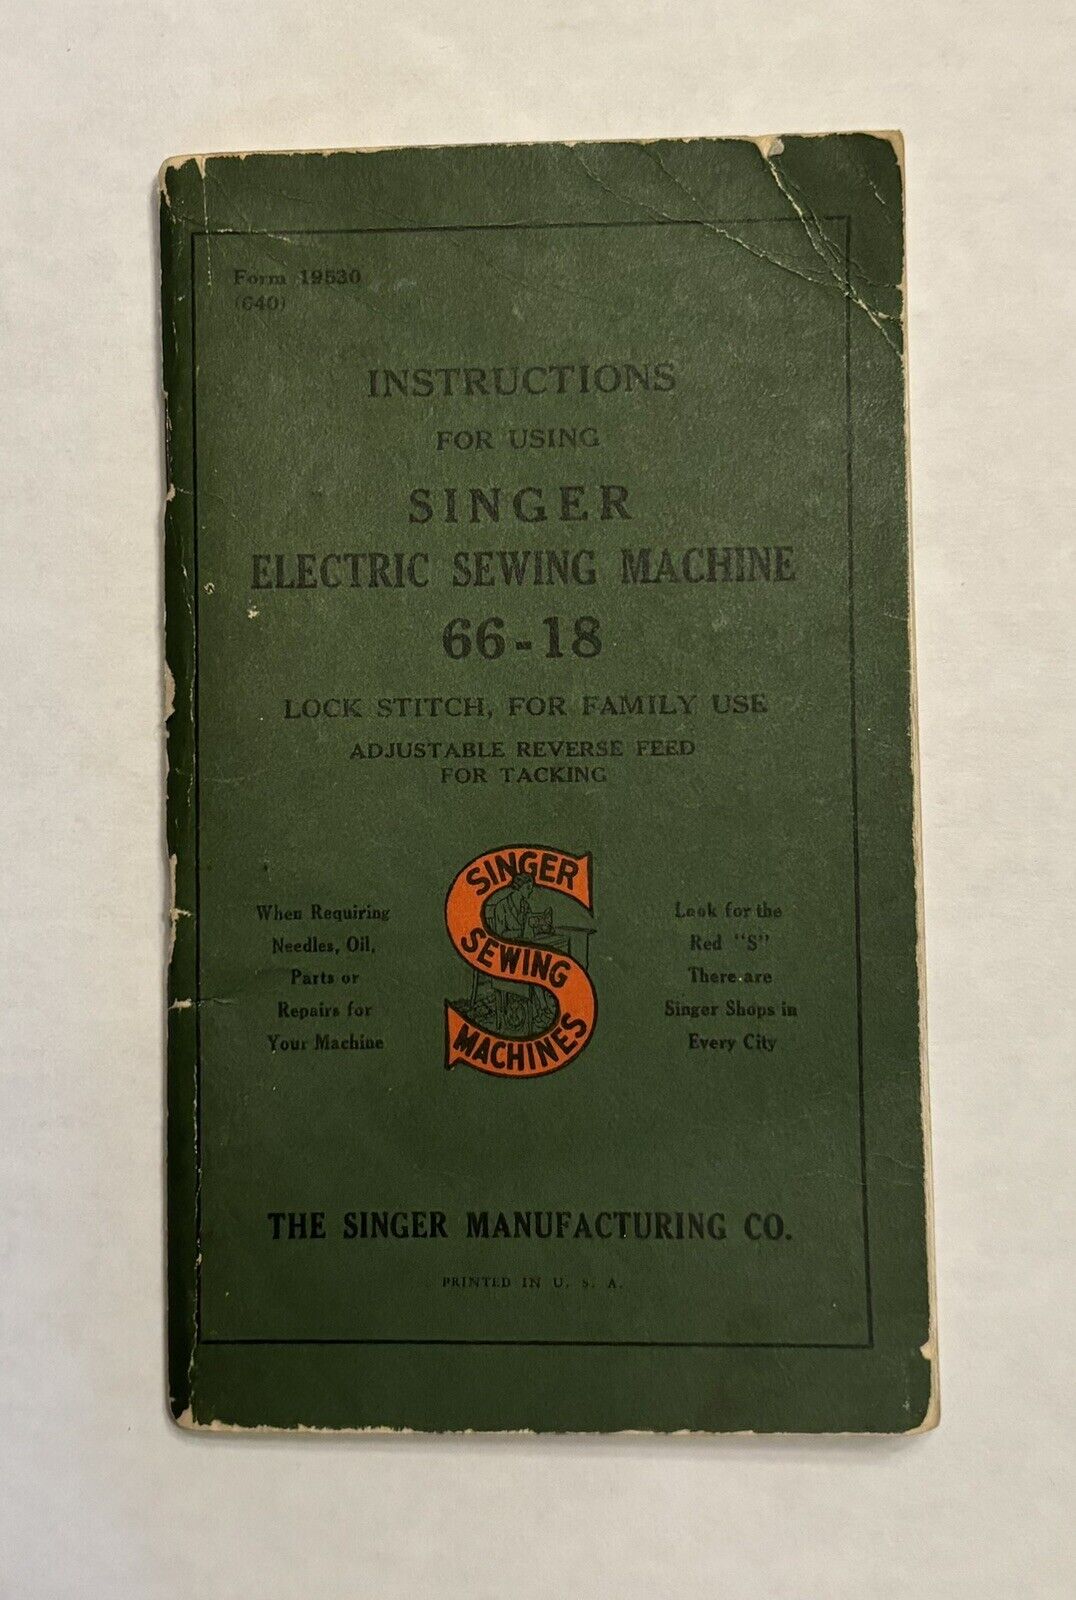 SINGER Sewing Machine 66-18 Instruction Manual 1940 edition